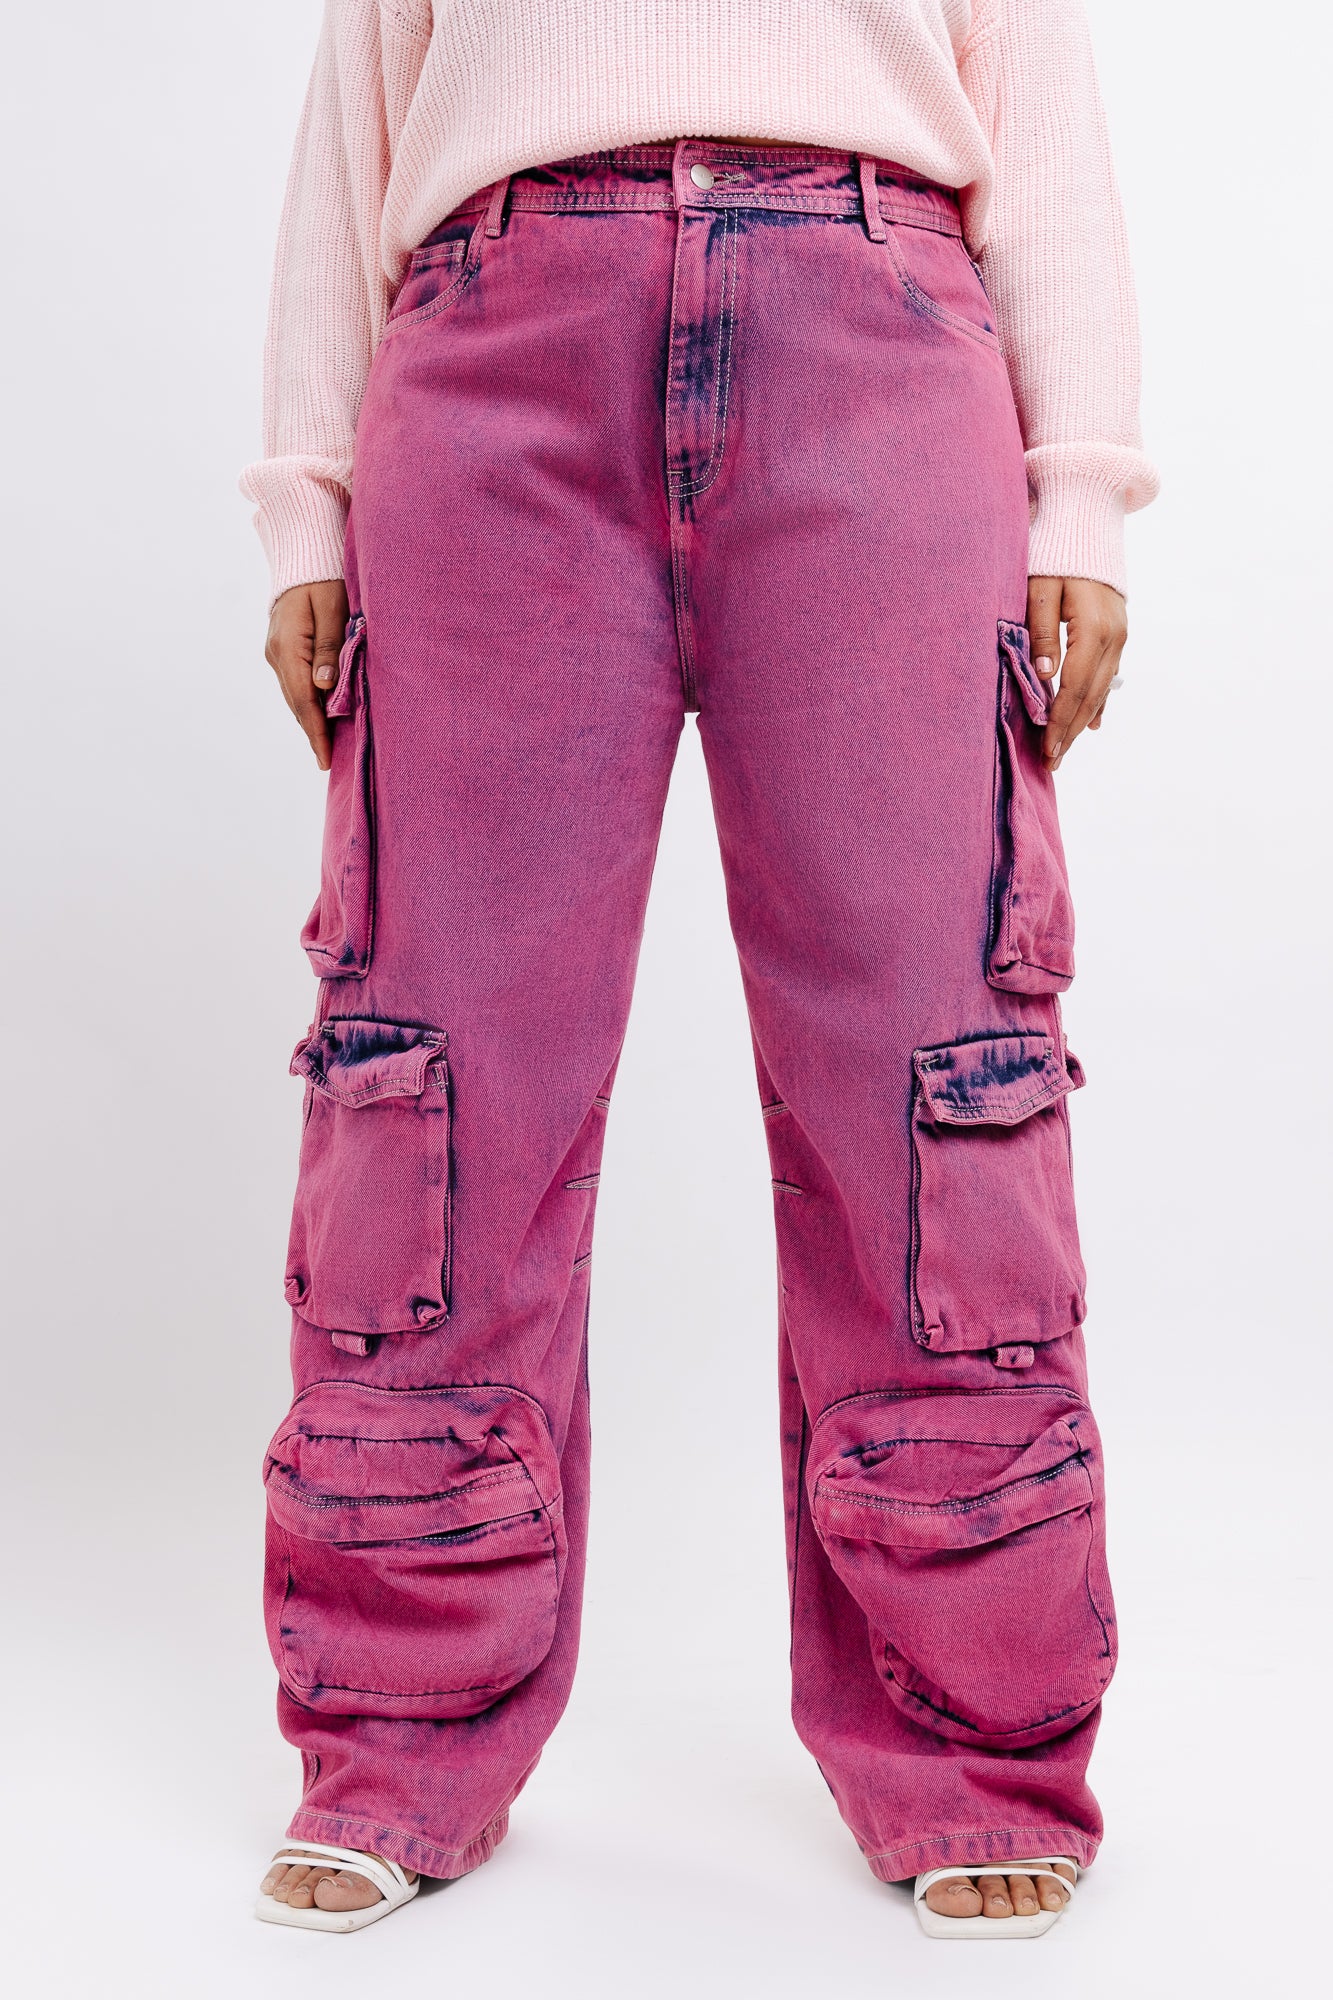 House of Tinks - All things Pink Cargo Pants and Not so basic